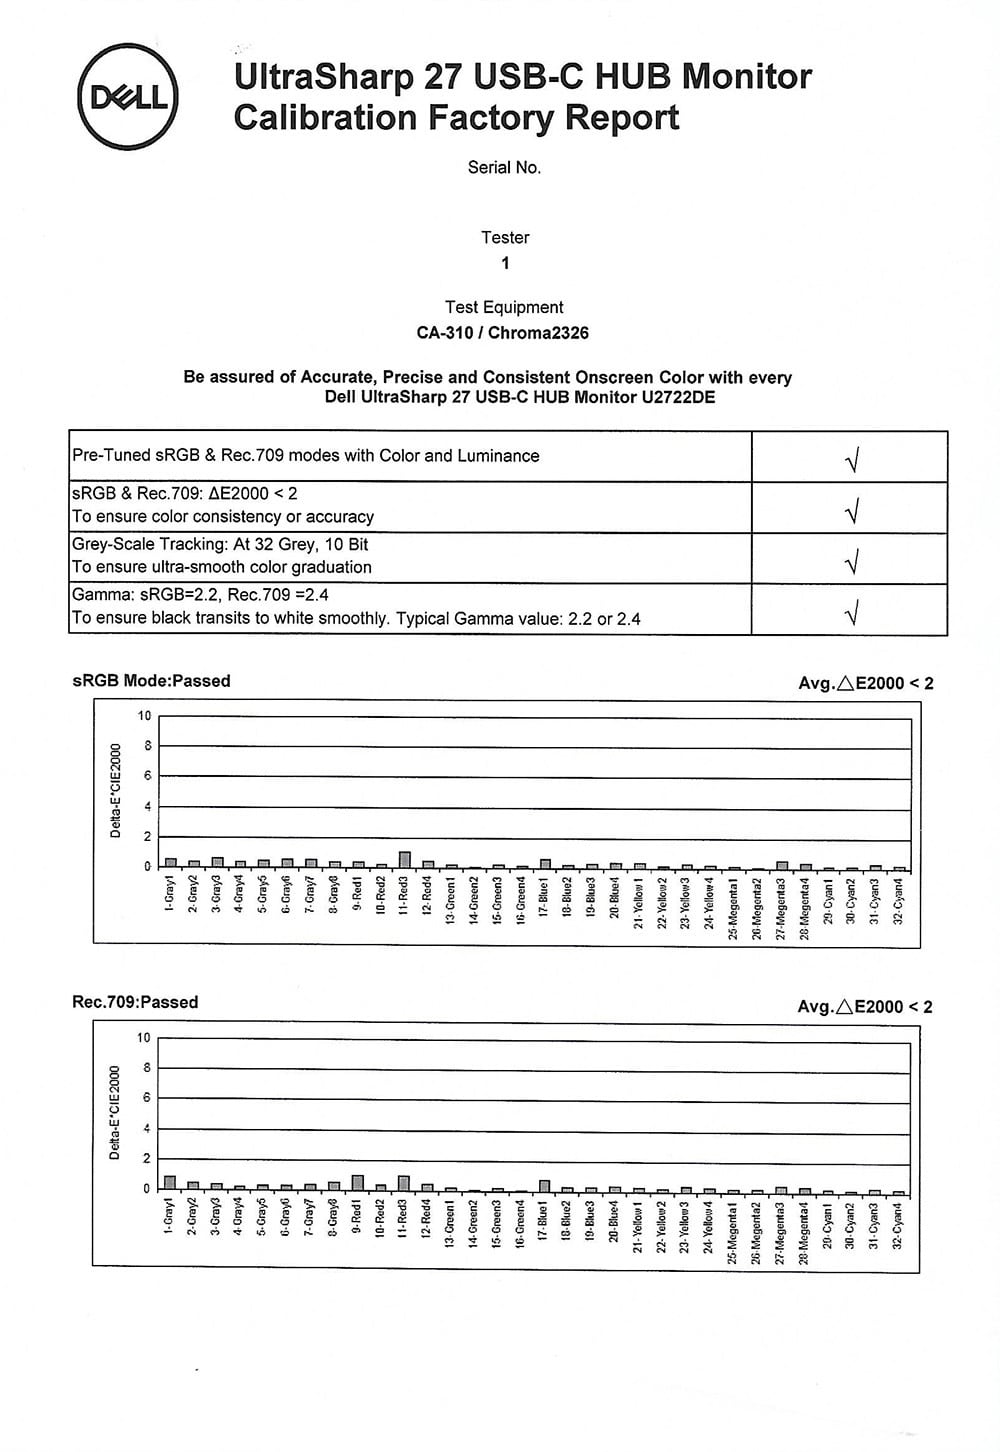 Factory calibration report from our unit shown. Use the arrows to scroll to page 2